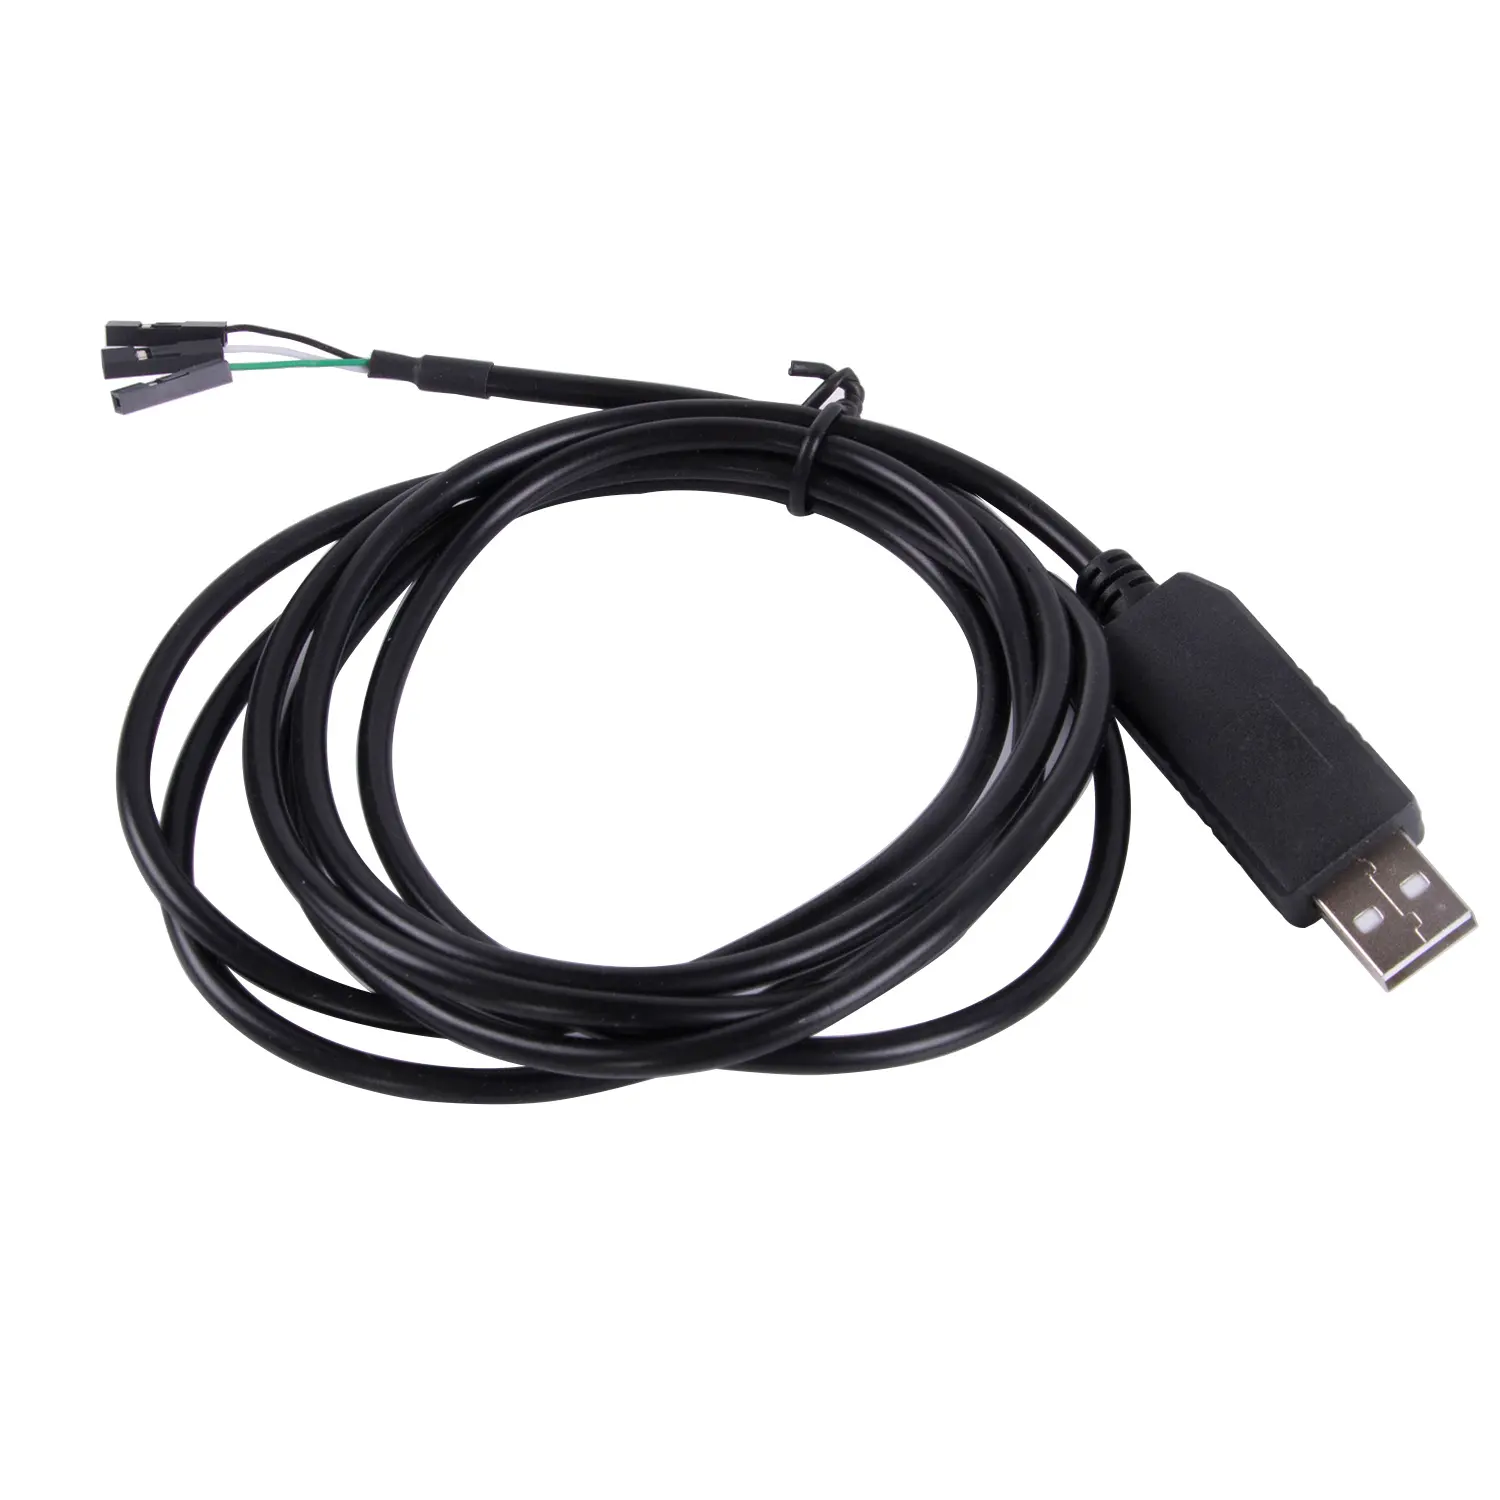 Wholesale FTDI FT232RL Download Line USB 2.0 to Serial Port Module 3Pin dupont wire 2.54mm pitch RS485 Serial Cable